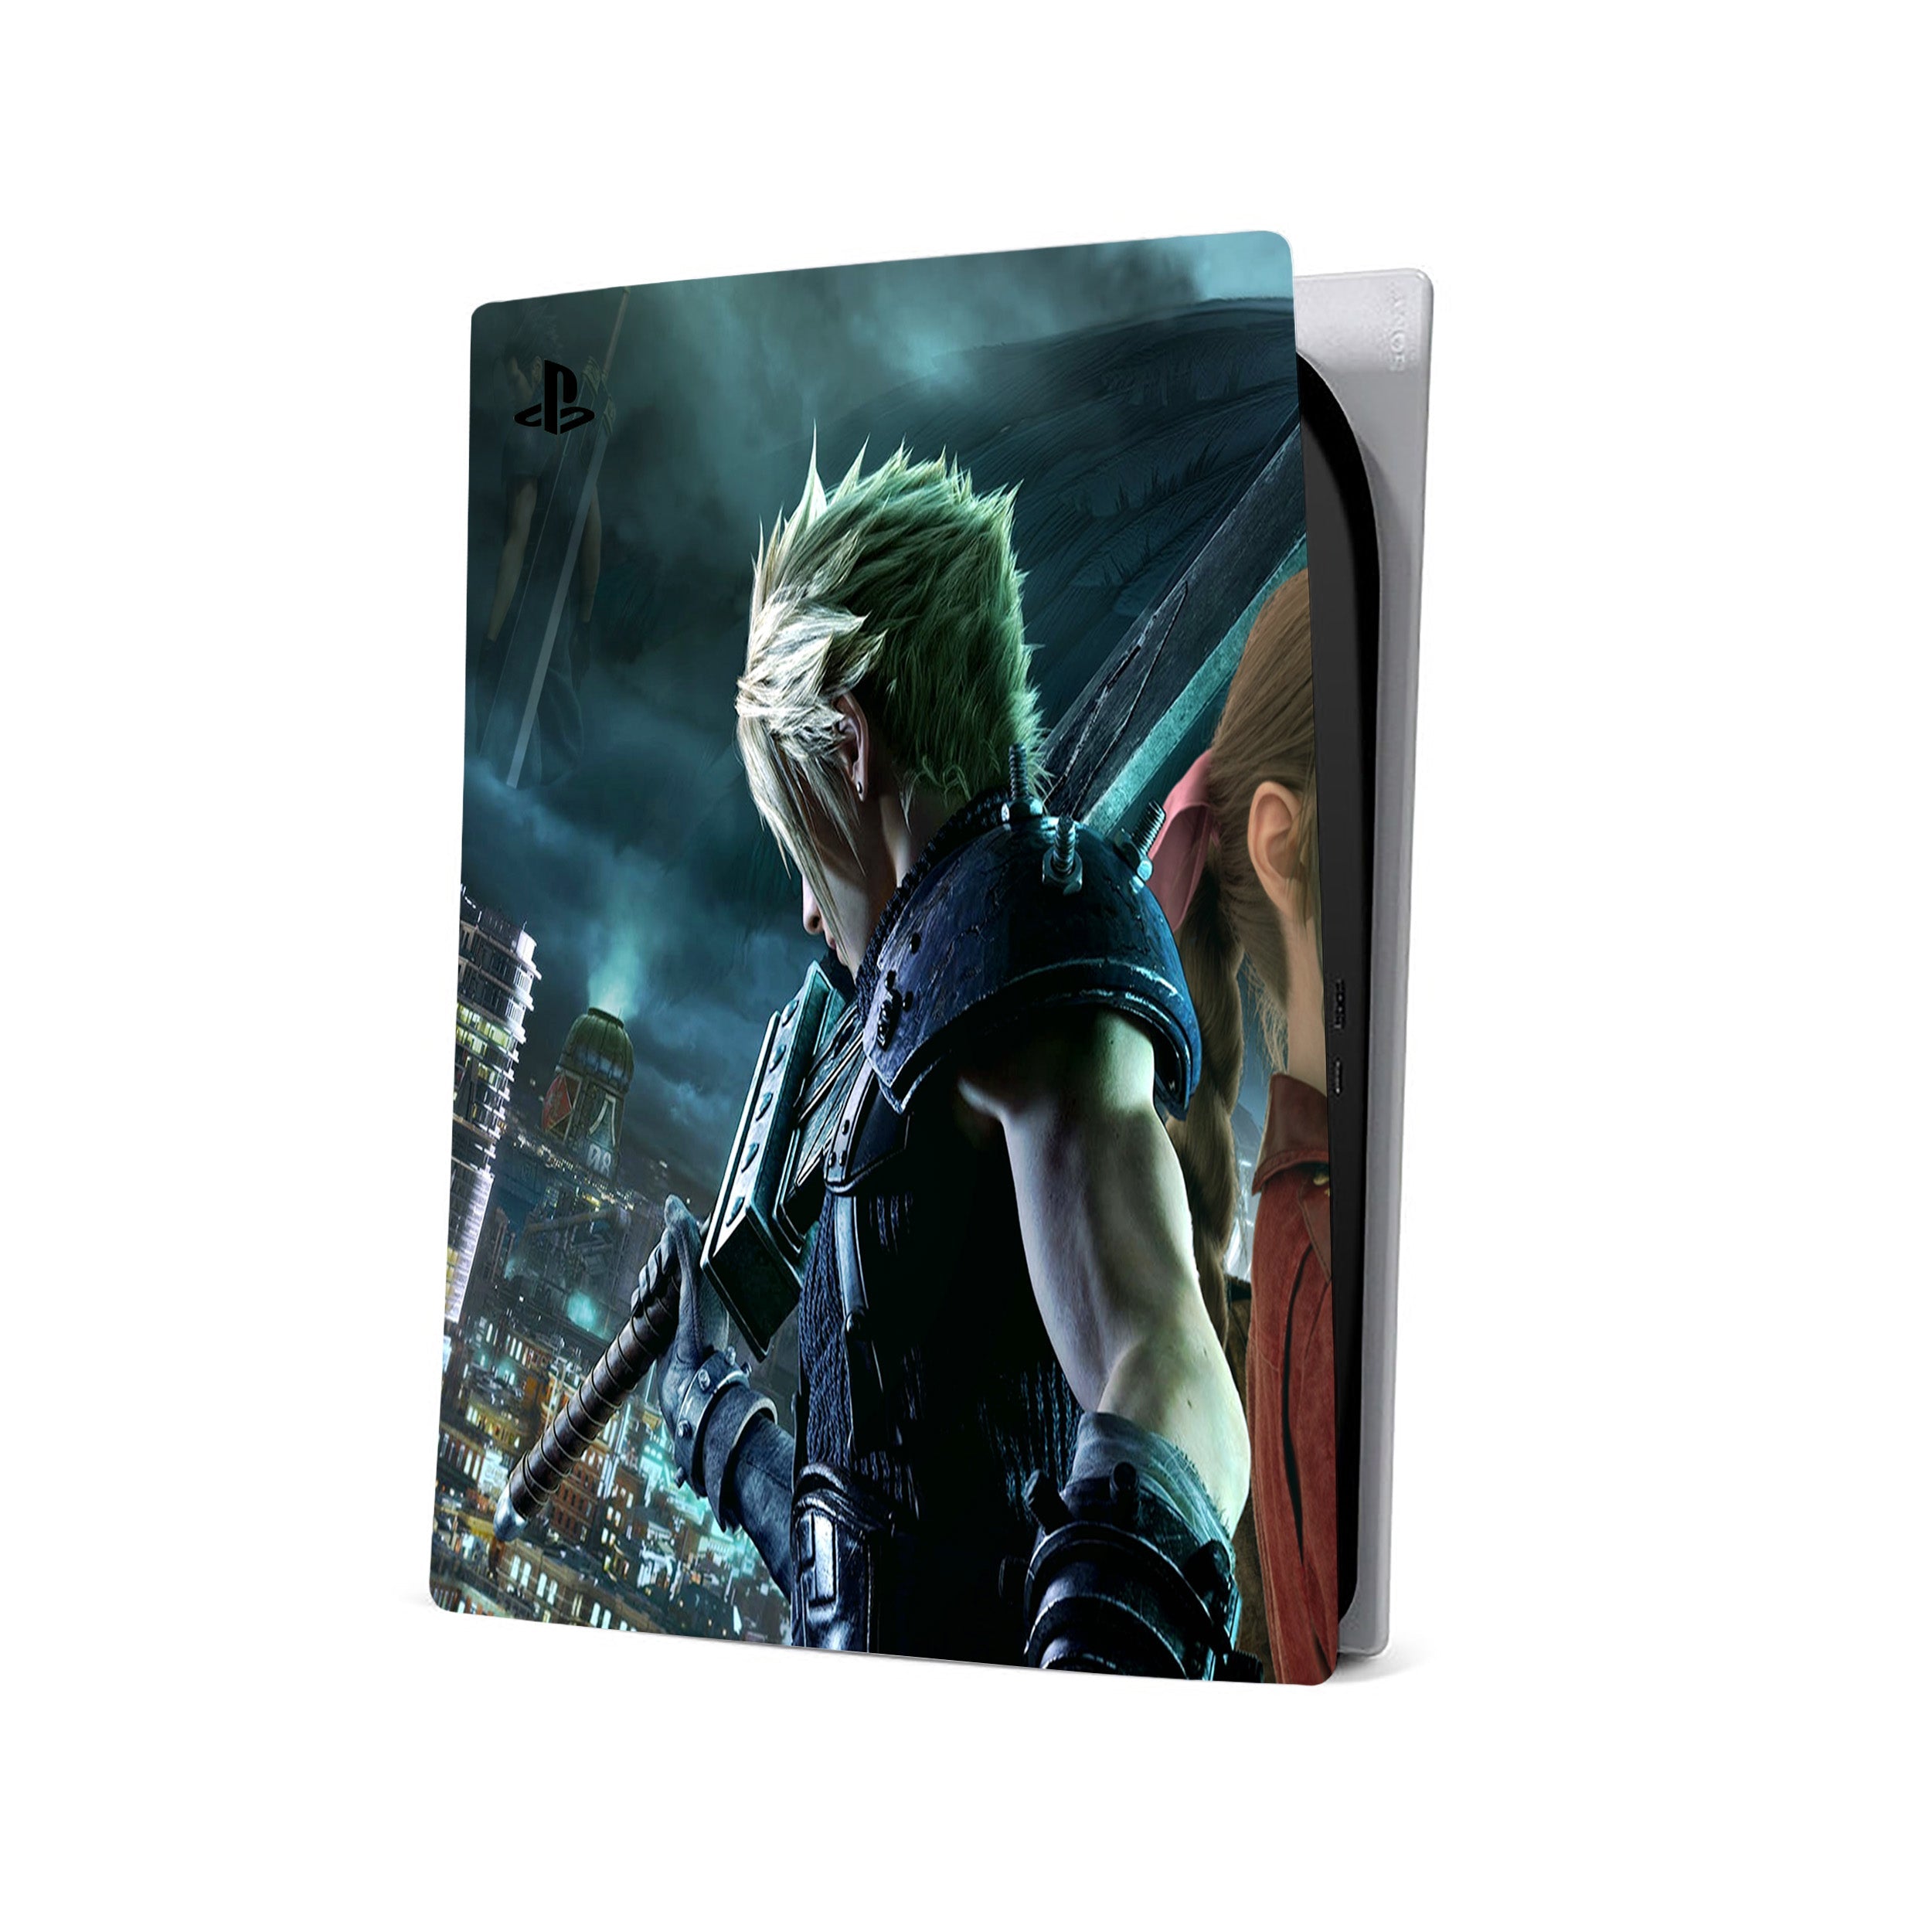 A video game skin featuring a Final Fantasy 7 Group design for the PS5.